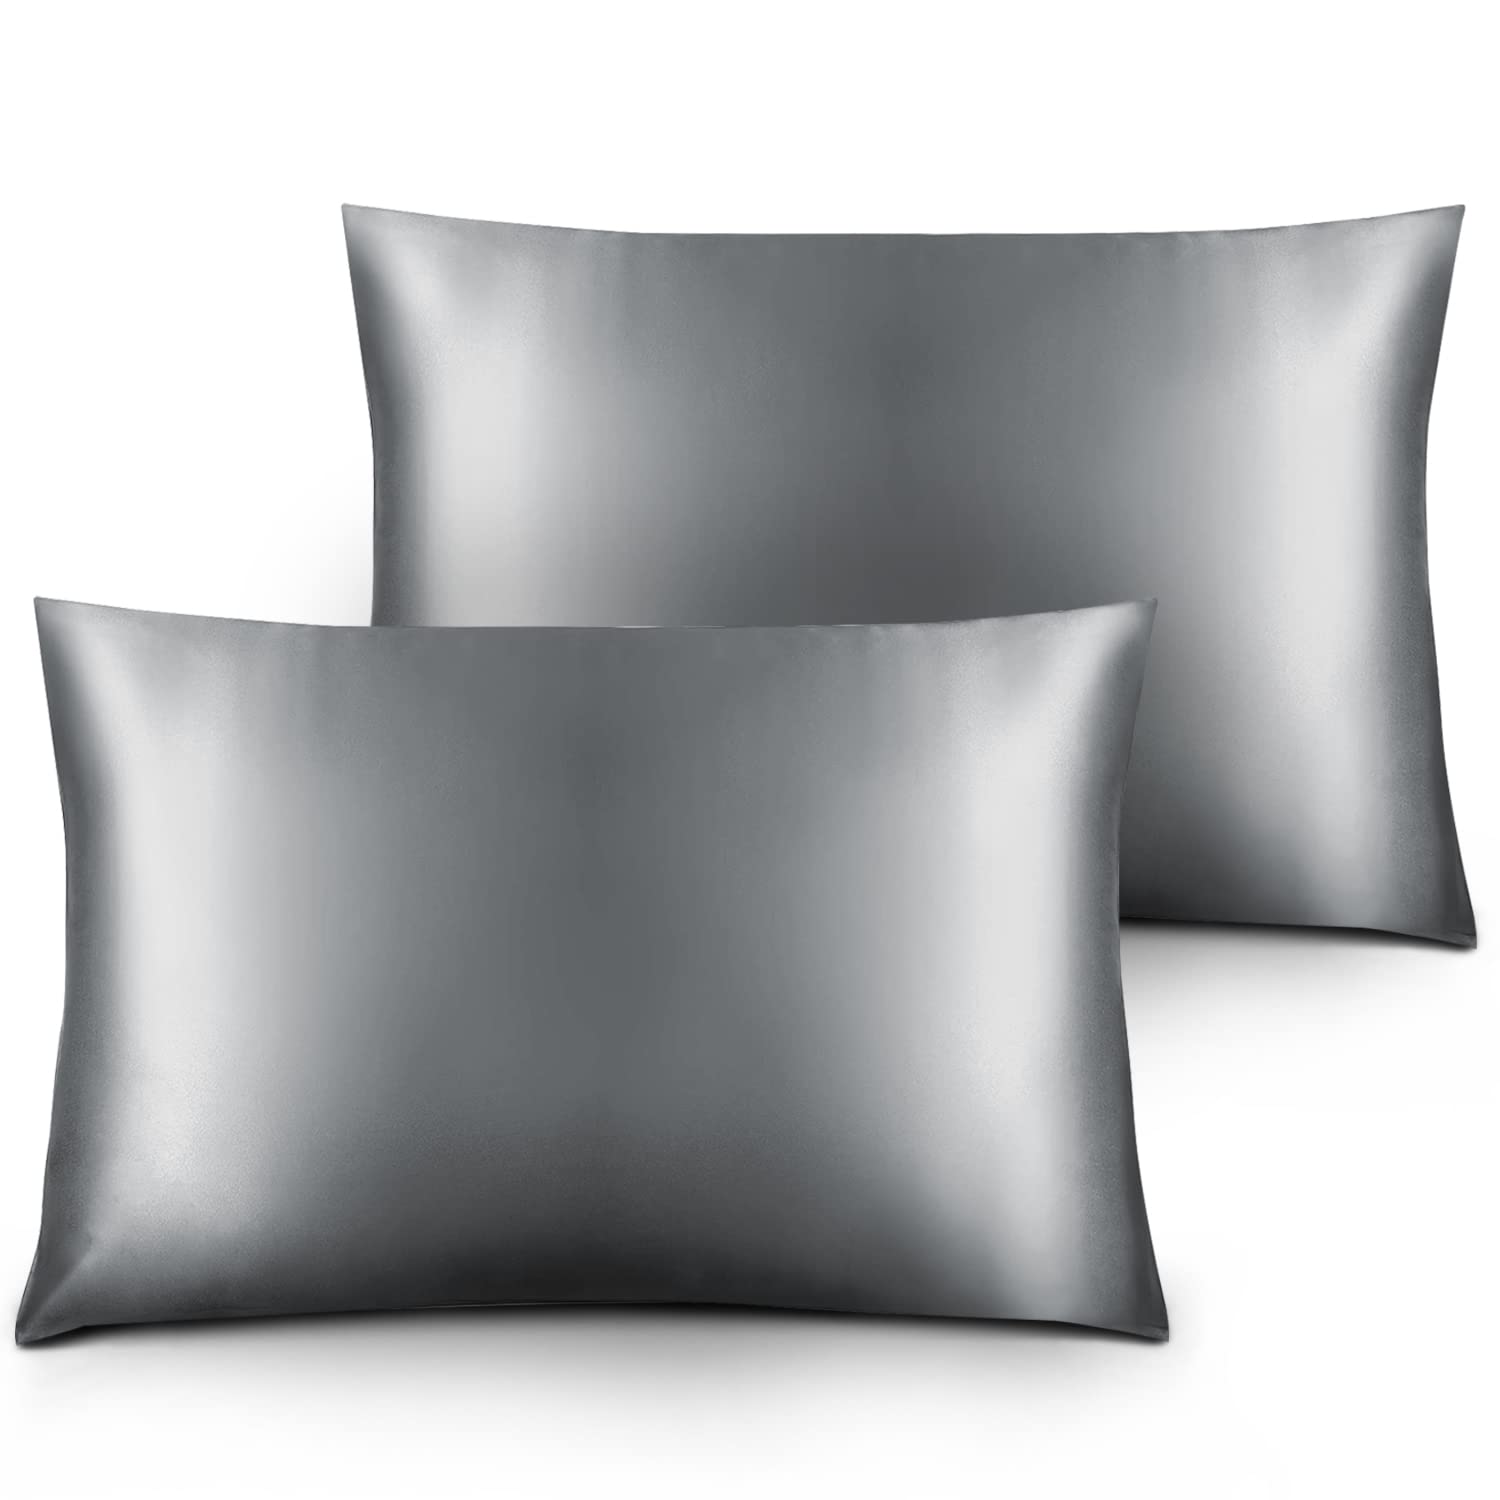 KEPLIN Satin Pillow Cases 2 Pack - Pillowcase for Hair and Skin Standard Size with Envelope Closure, 50 x 75 cm (Grey)